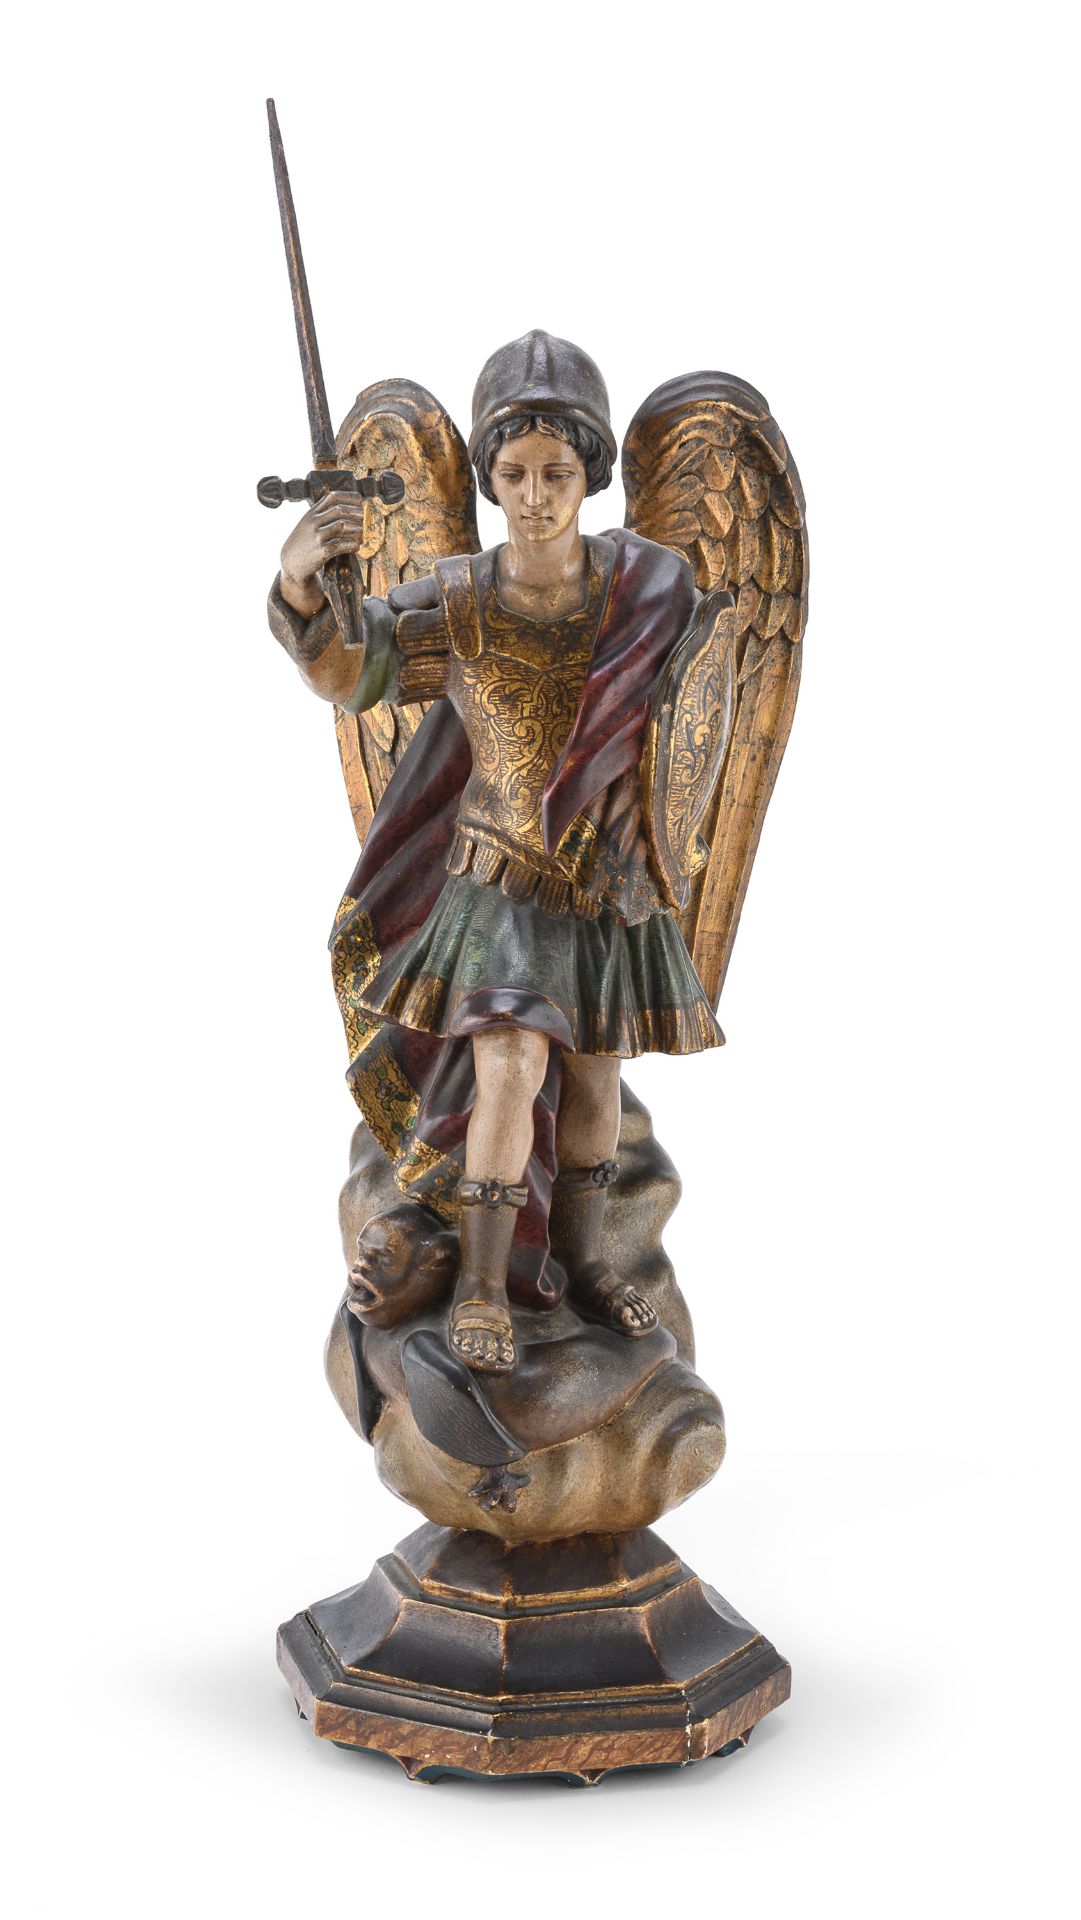 SCULPTURE OF SAINT MICHAEL LATE 18TH EARLY 19TH CENTURY